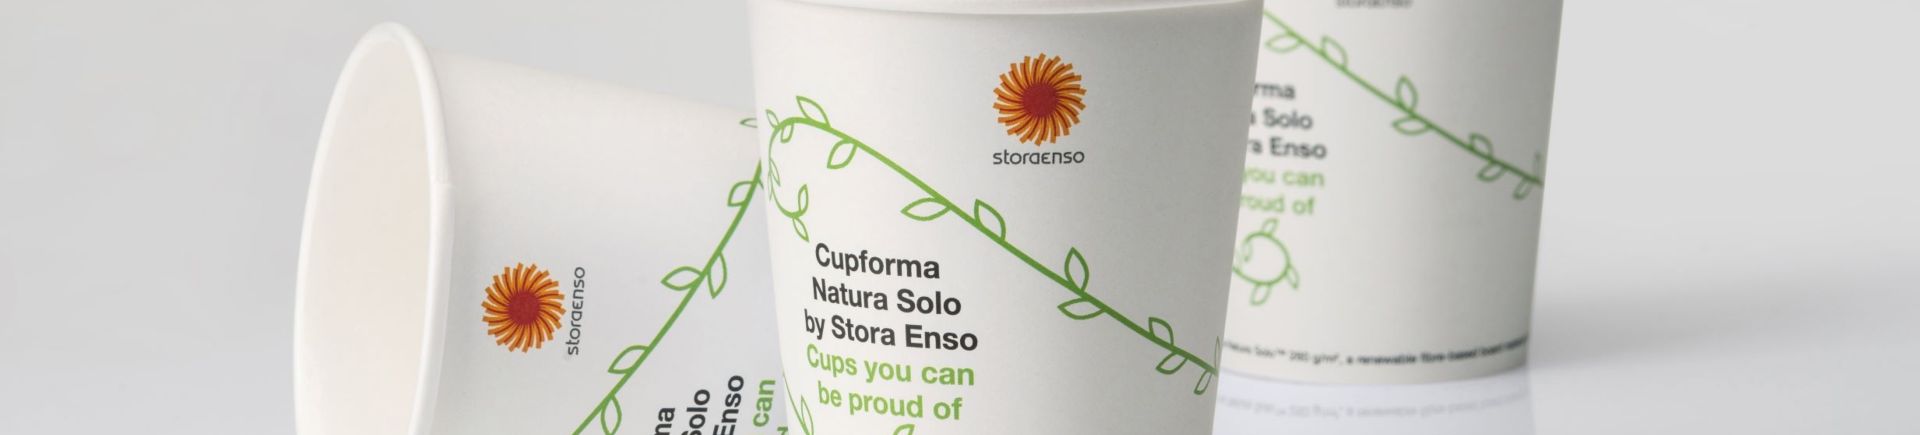 Stora Enso-paper cups